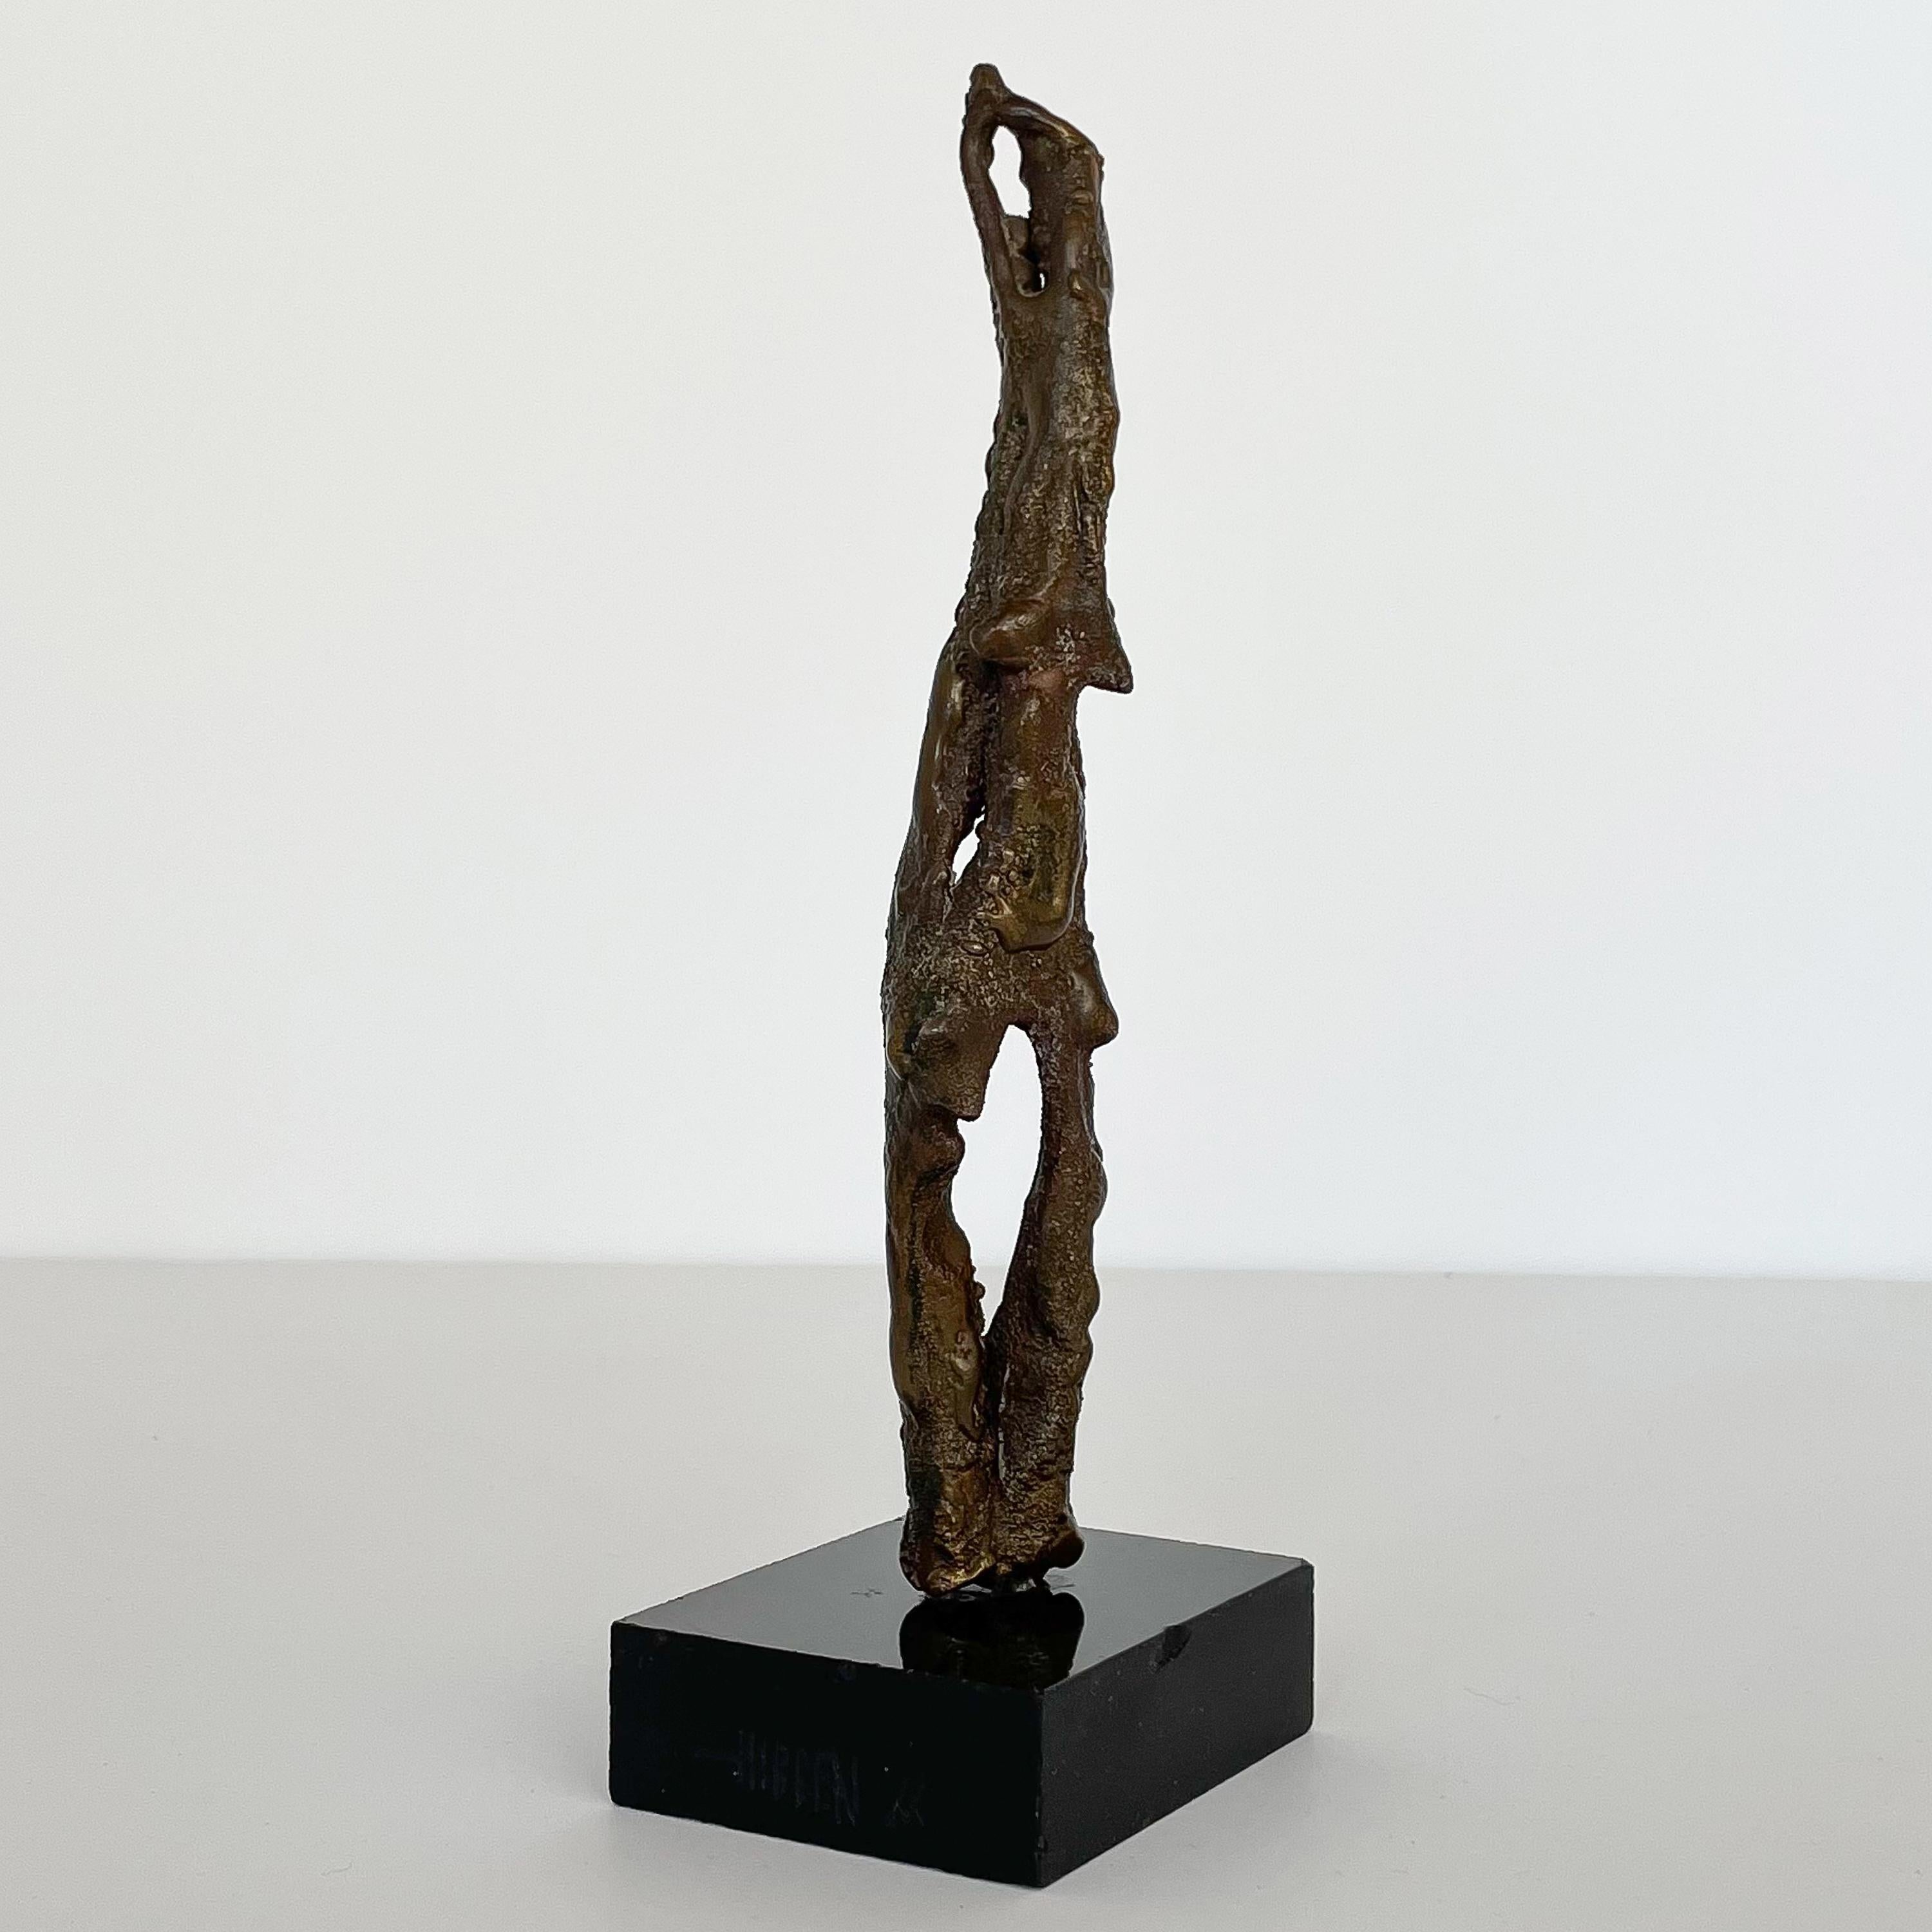 A petite Brutalist bronze sculpture by Chicago artist Thomas Hibben, circa 1966. Abstract textured bronze sculpture mounted on black base. Signed / inscribed on the front of the base 